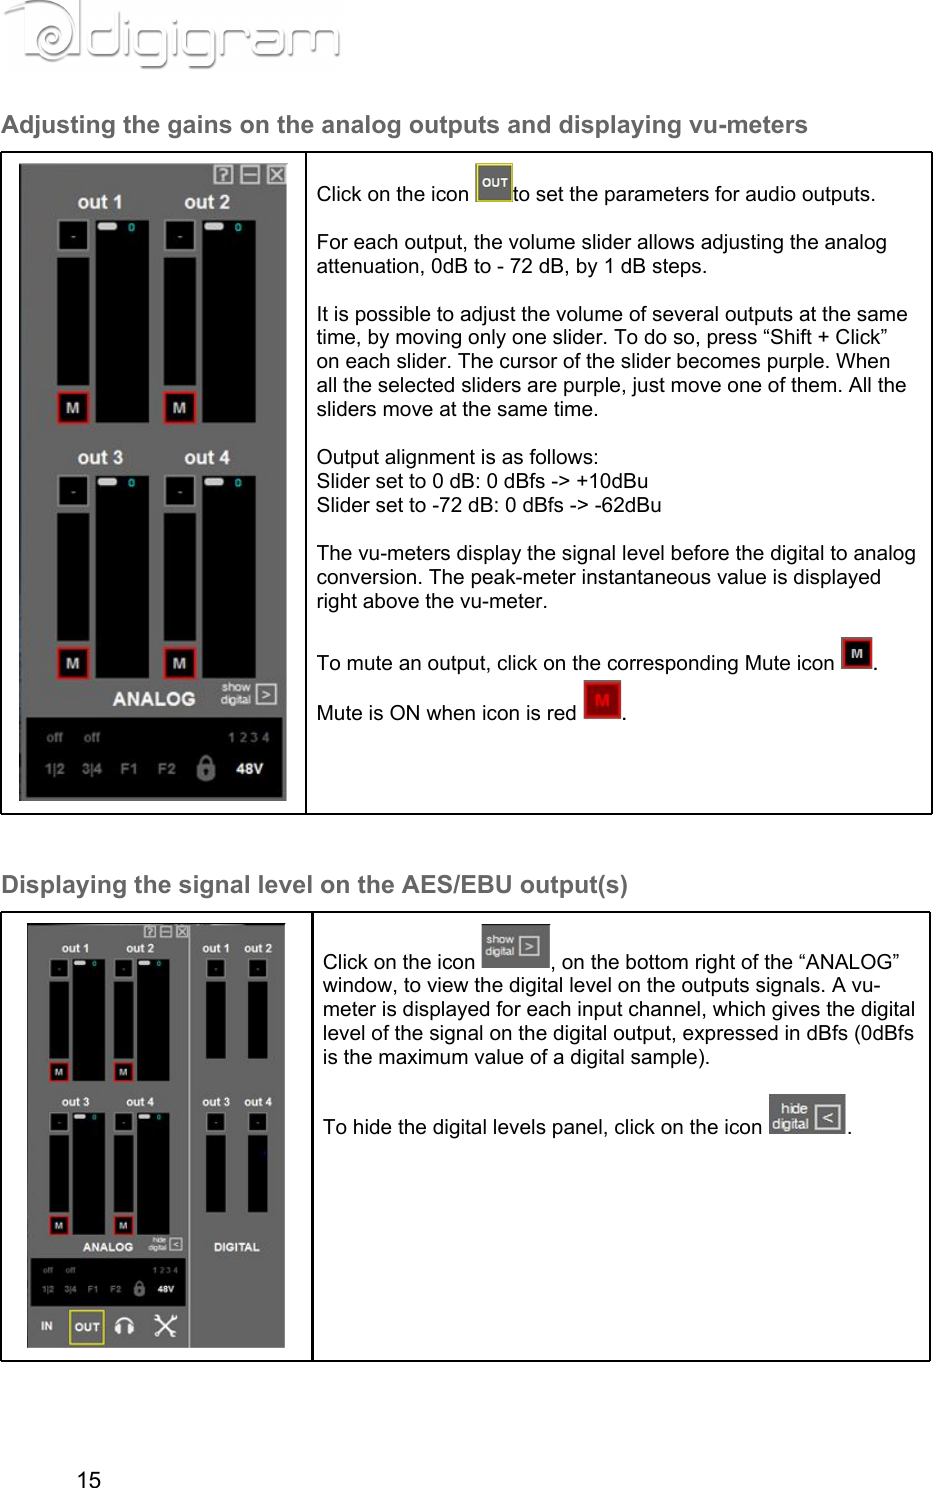 Adjusting the gains on the analog outputs and displaying vu-metersClick on the icon  to set the parameters for audio outputs.  For each output, the volume slider allows adjusting the analog attenuation, 0dB to - 72 dB, by 1 dB steps.  It is possible to adjust the volume of several outputs at the same time, by moving only one slider. To do so, press “Shift + Click” on each slider. The cursor of the slider becomes purple. When all the selected sliders are purple, just move one of them. All the sliders move at the same time.  Output alignment is as follows:Slider set to 0 dB: 0 dBfs -&gt; +10dBuSlider set to -72 dB: 0 dBfs -&gt; -62dBu  The vu-meters display the signal level before the digital to analog conversion. The peak-meter instantaneous value is displayed right above the vu-meter.  To mute an output, click on the corresponding Mute icon  . Mute is ON when icon is red  . Displaying the signal level on the AES/EBU output(s)Click on the icon  , on the bottom right of the “ANALOG” window, to view the digital level on the outputs signals. A vu-meter is displayed for each input channel, which gives the digital level of the signal on the digital output, expressed in dBfs (0dBfs is the maximum value of a digital sample). To hide the digital levels panel, click on the icon  .       15